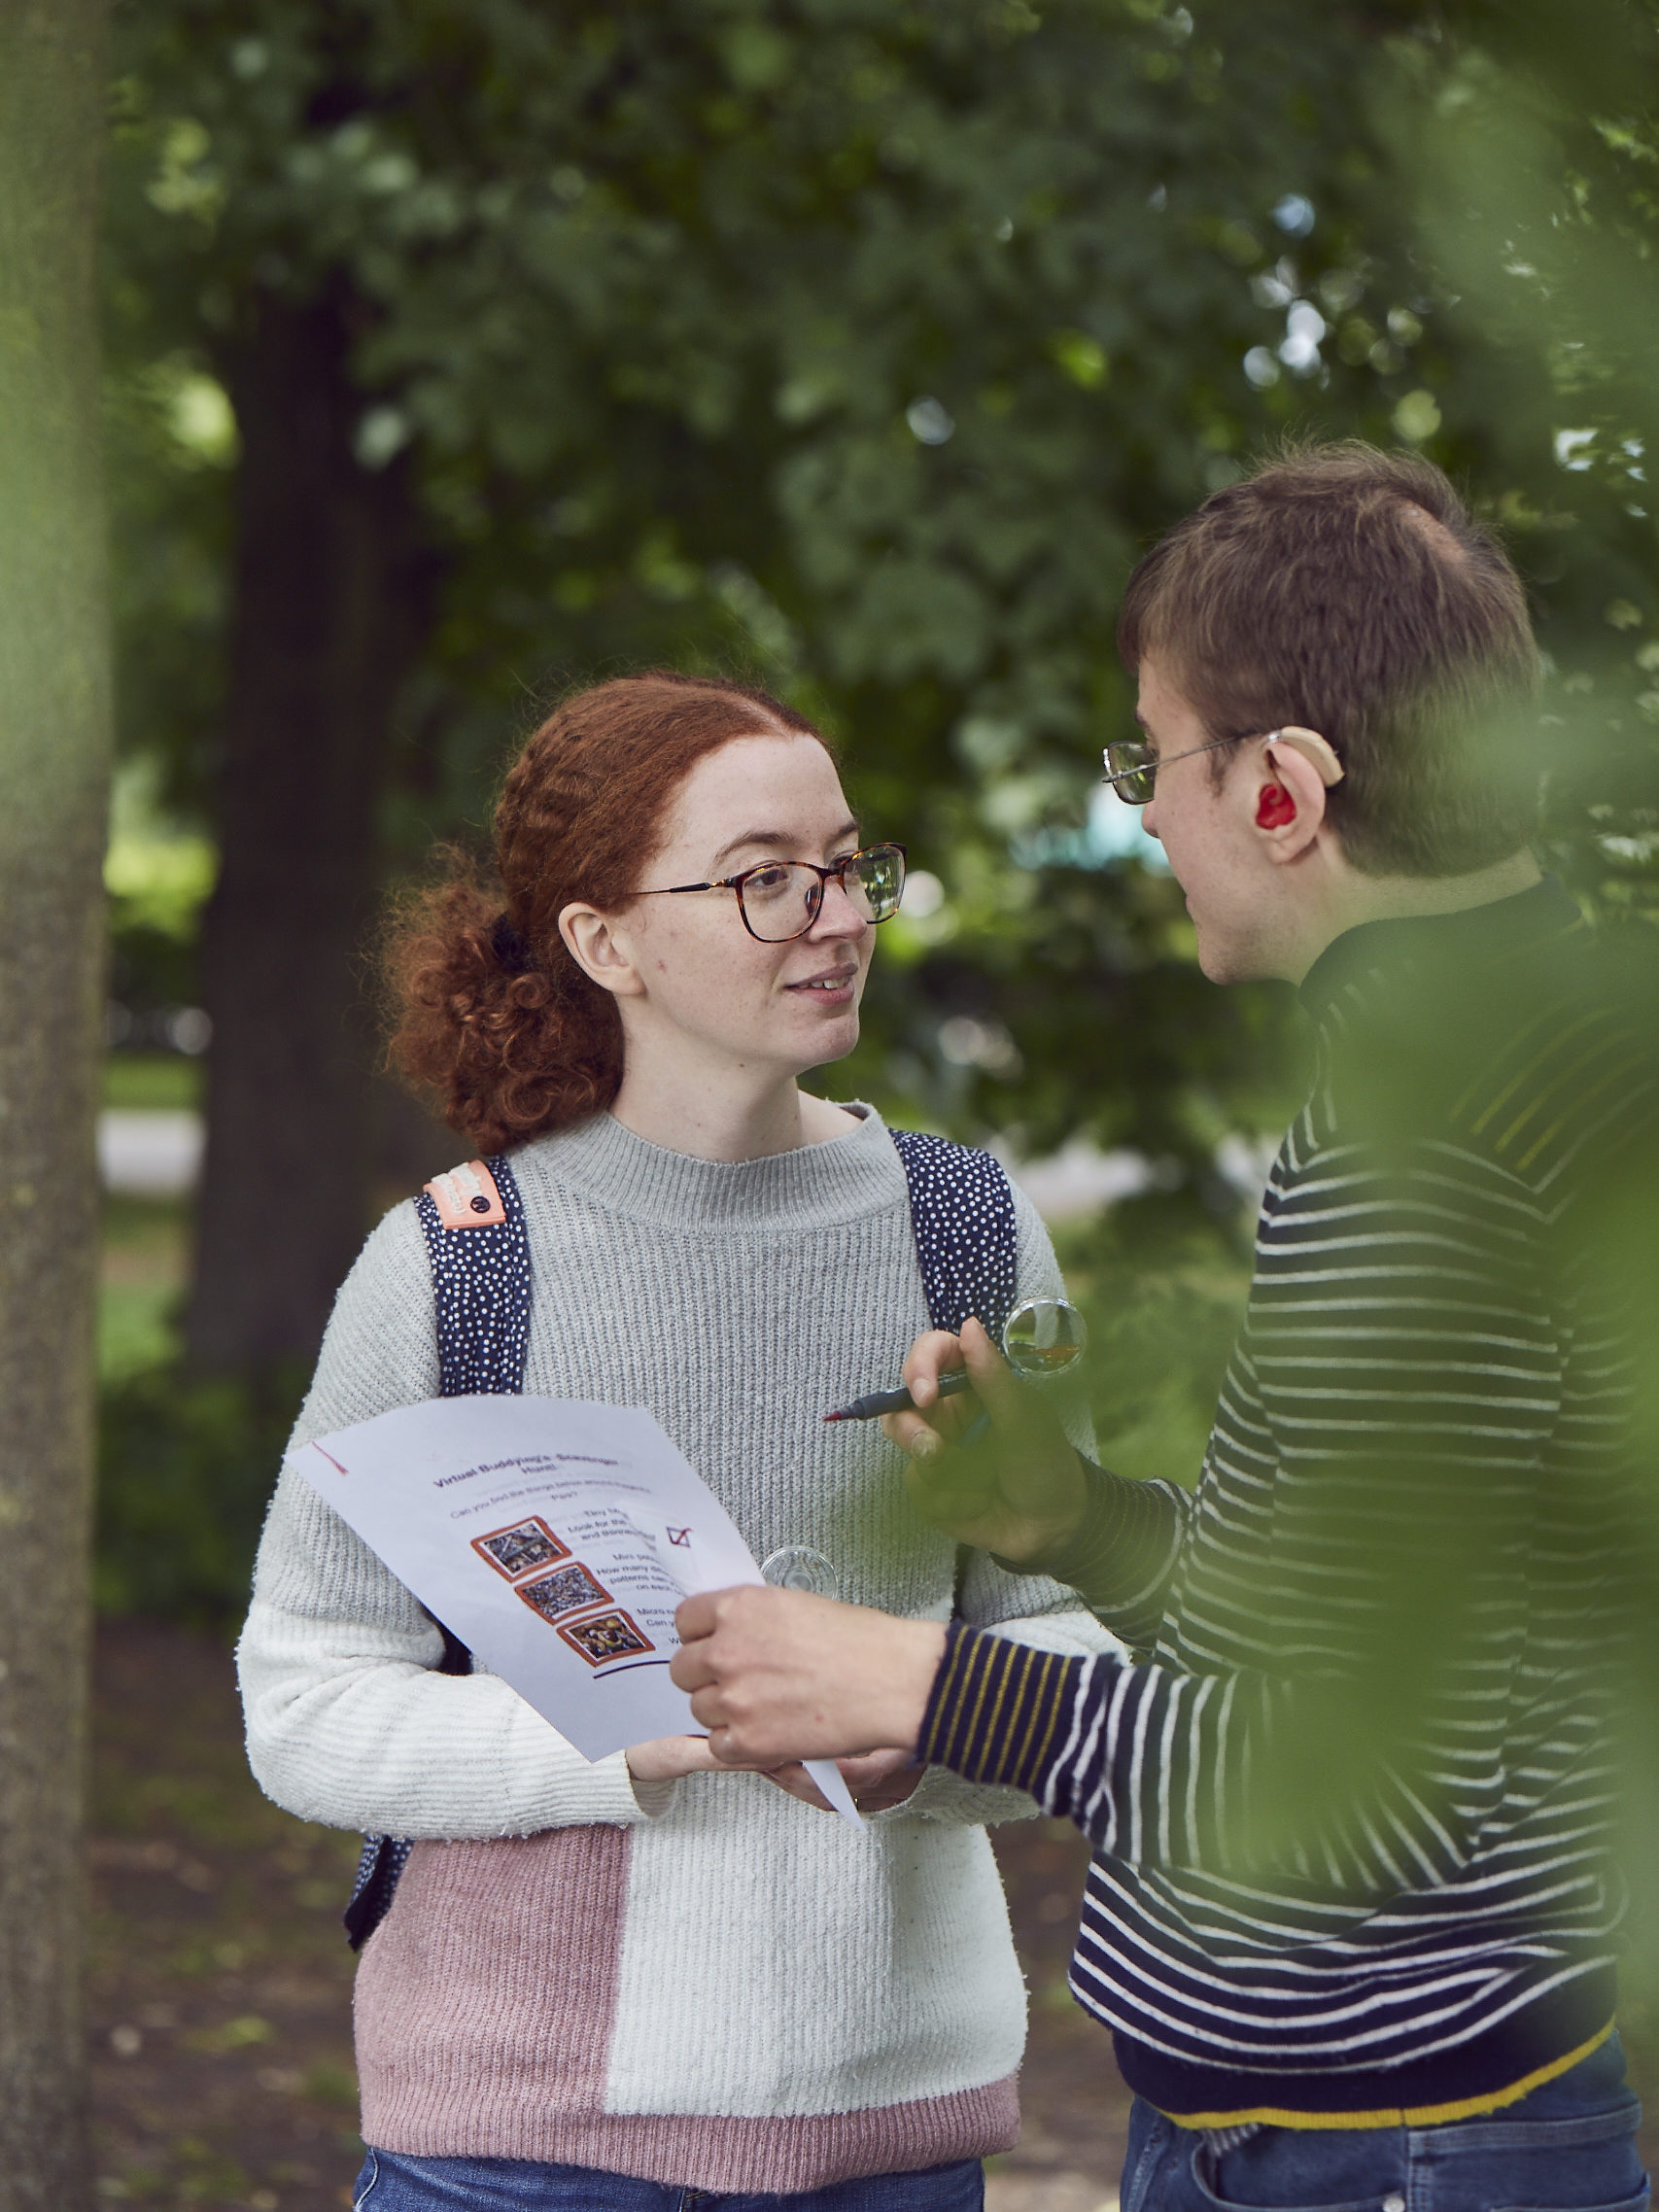 A red-haired woman and a brown-haired man are talking next to some trees